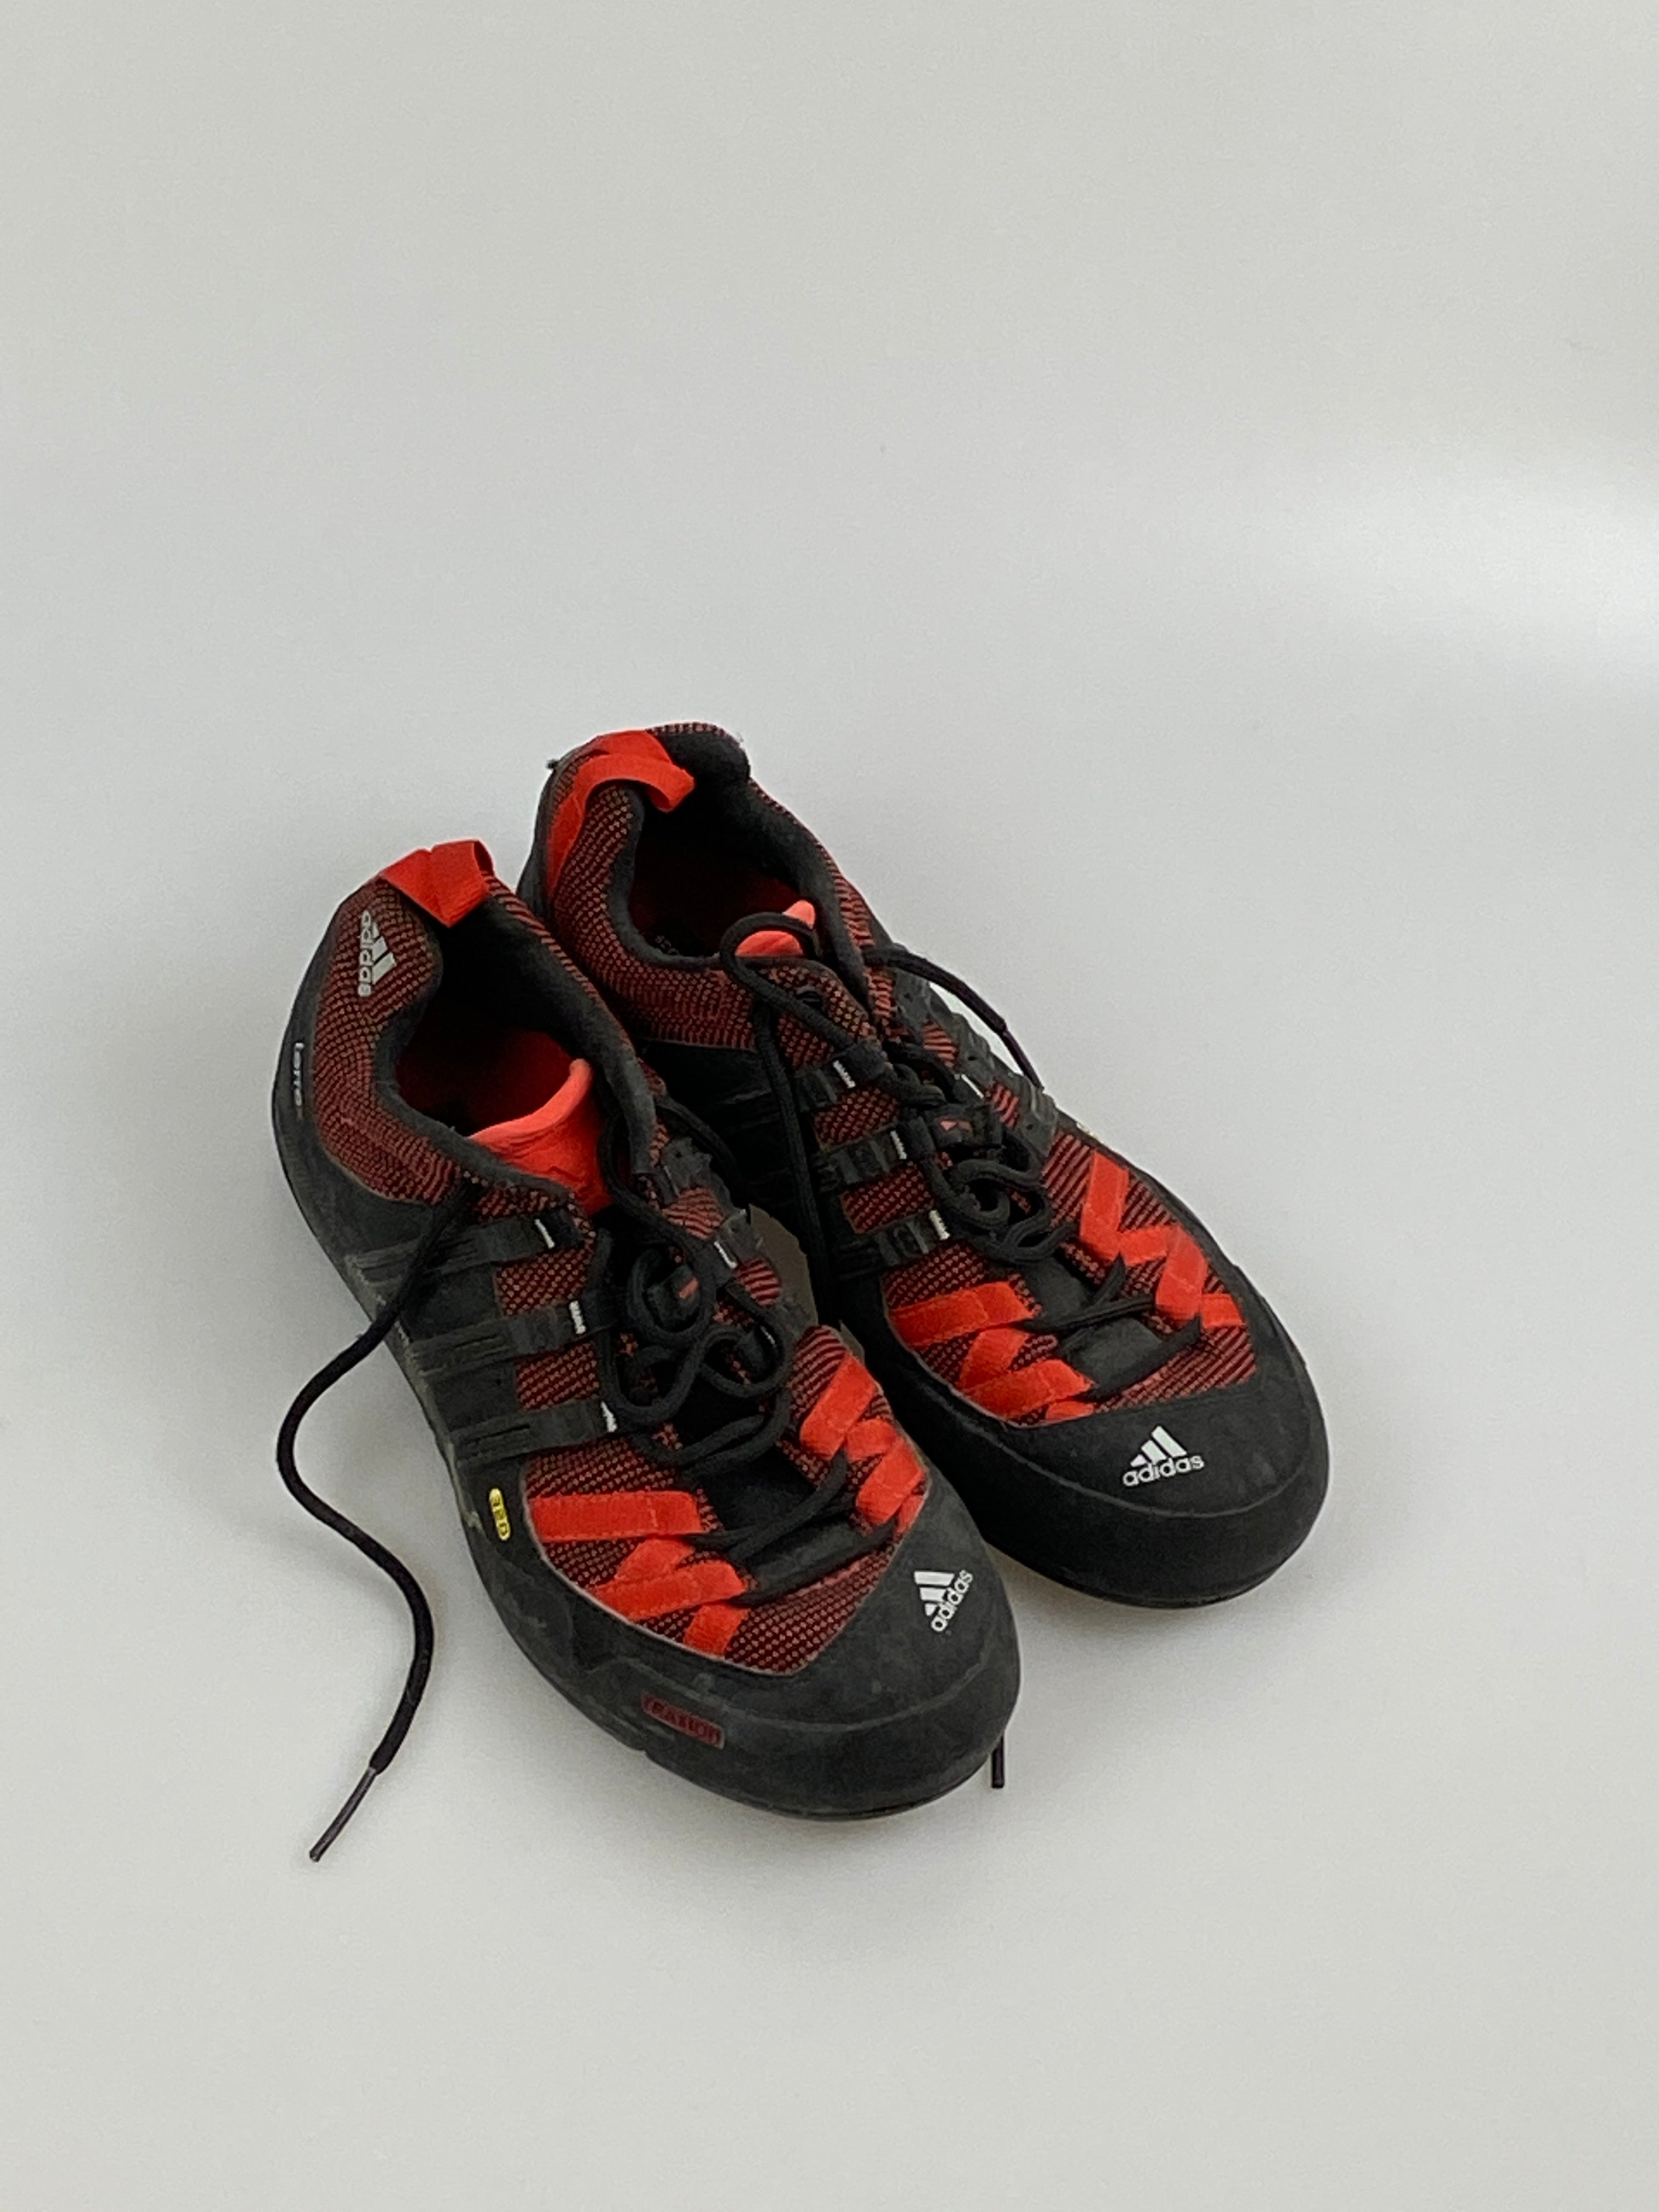 Adidas Terrex Climbing Shoes – The Locals Sale